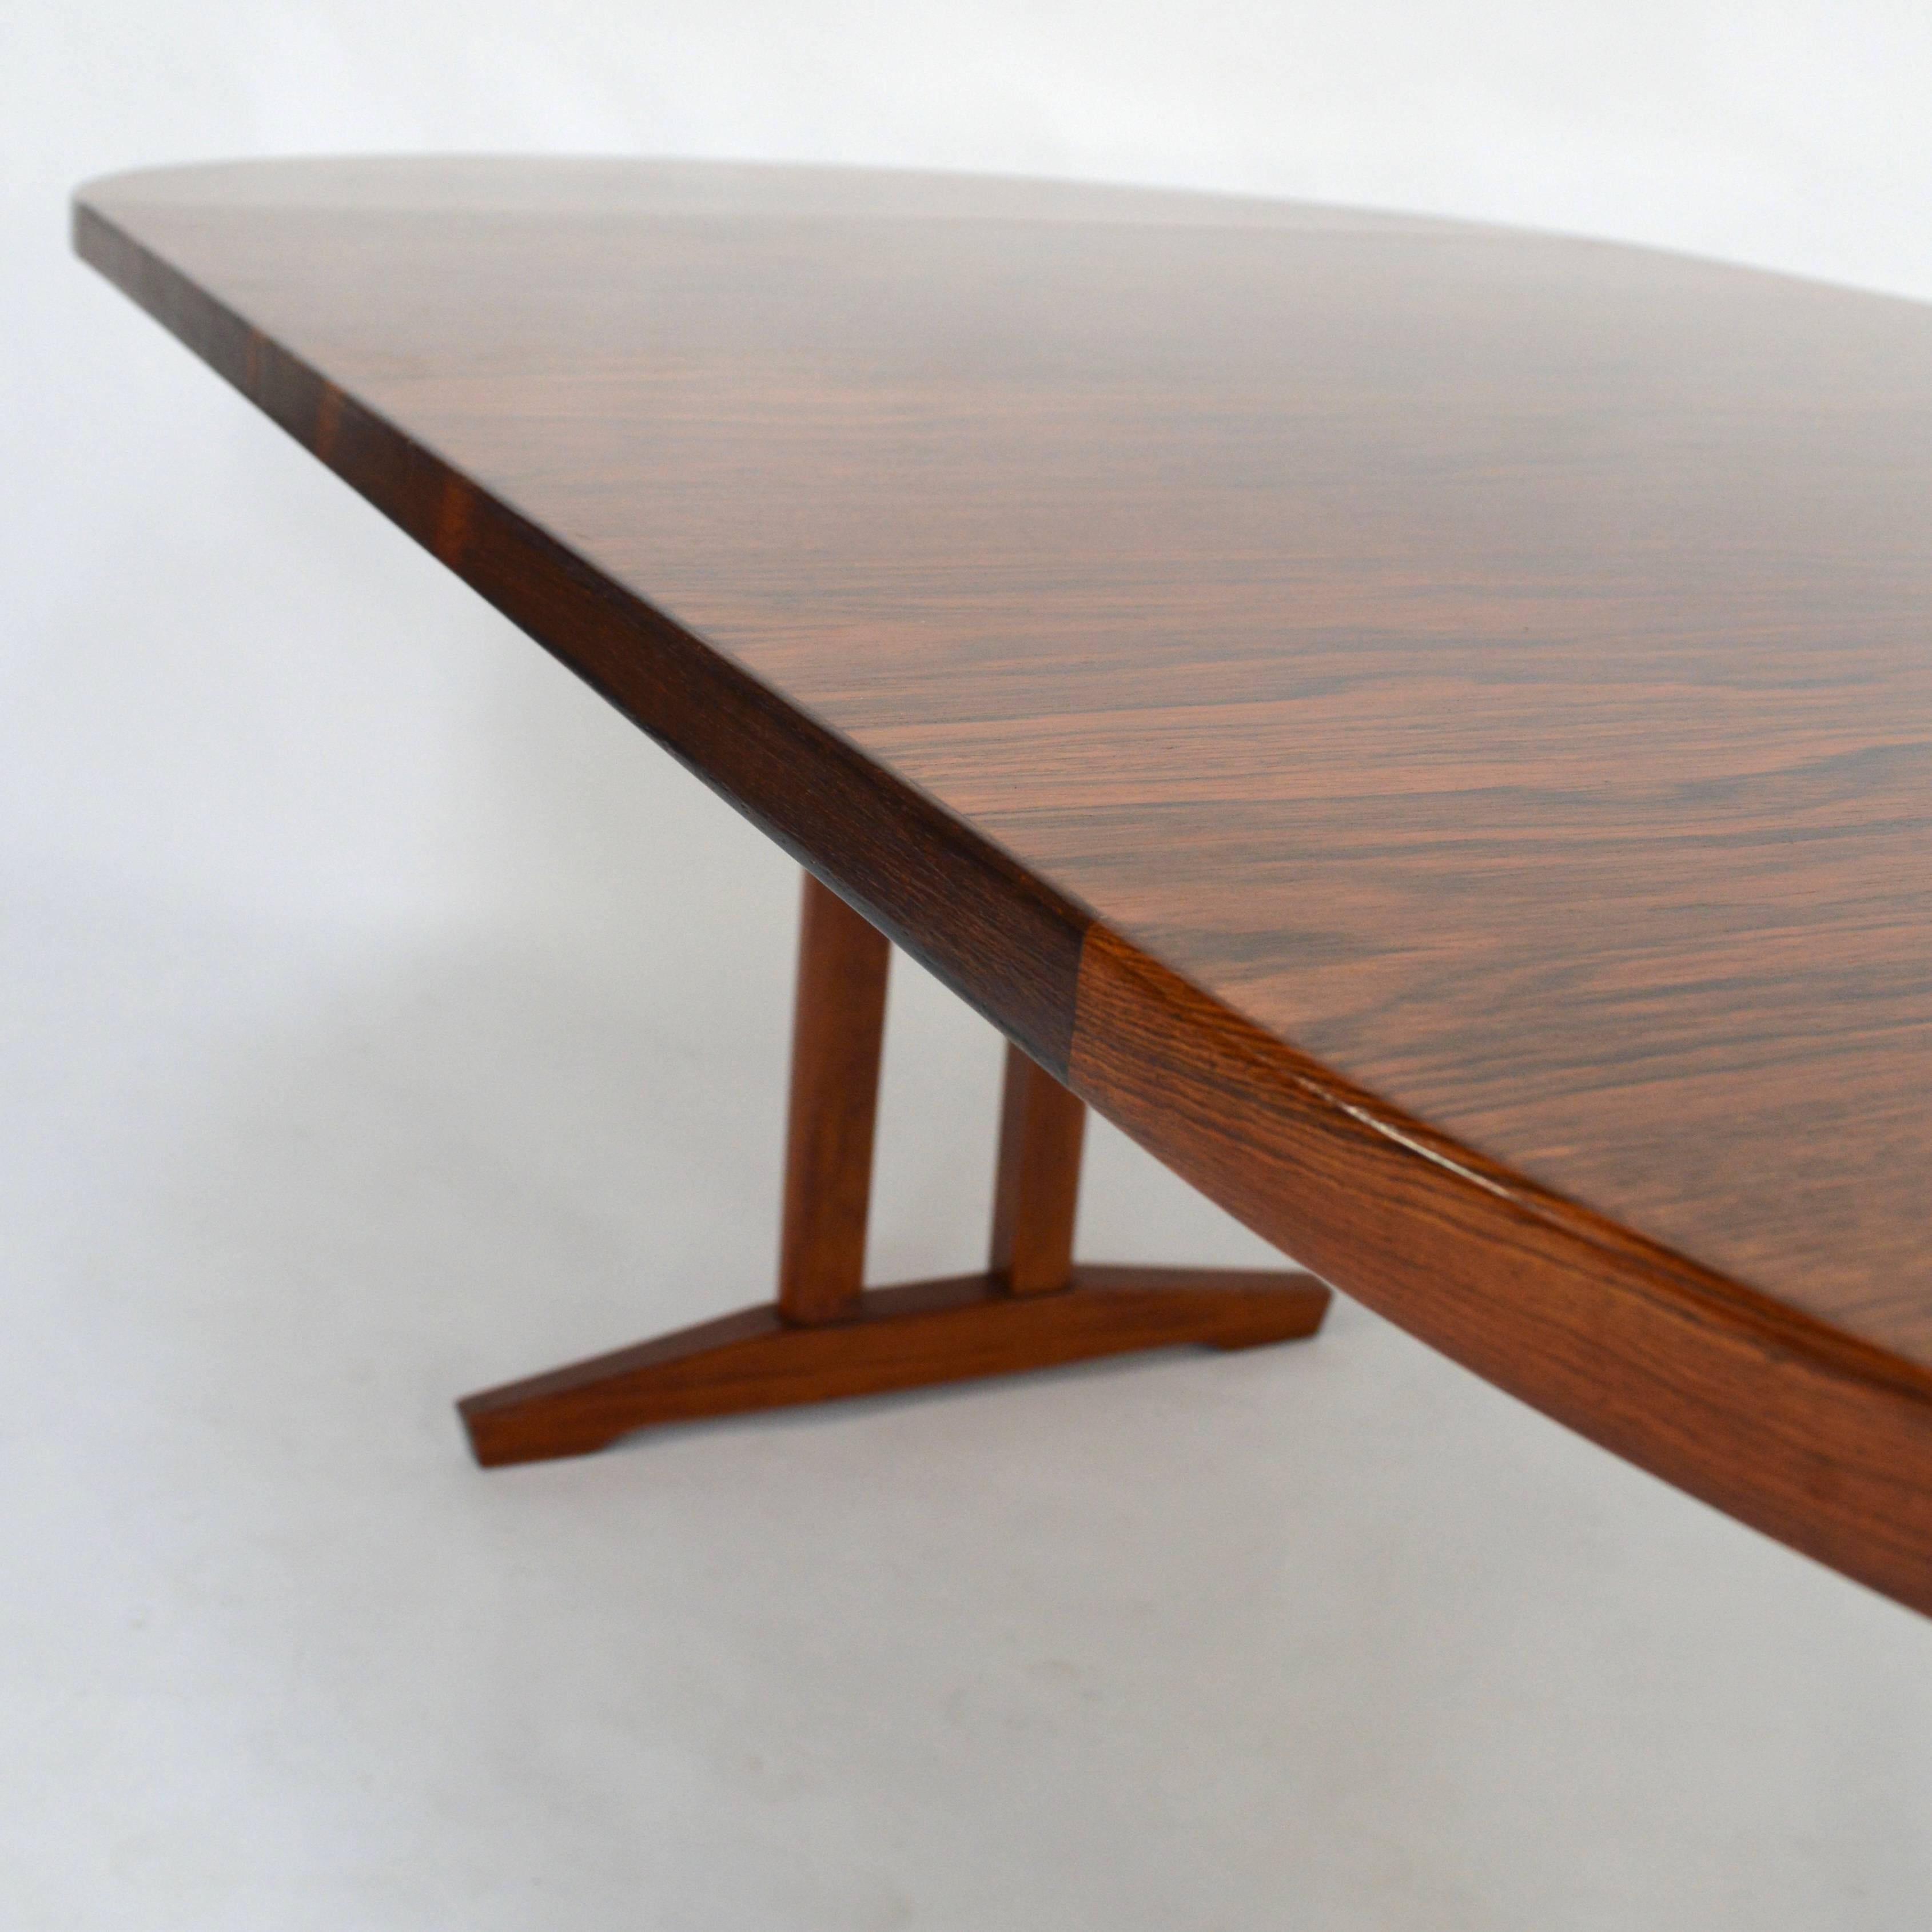 20th Century Brazilian Rosewood Oval Drop Leaf Dining Table by FRISTHO, Netherlands, 1960s